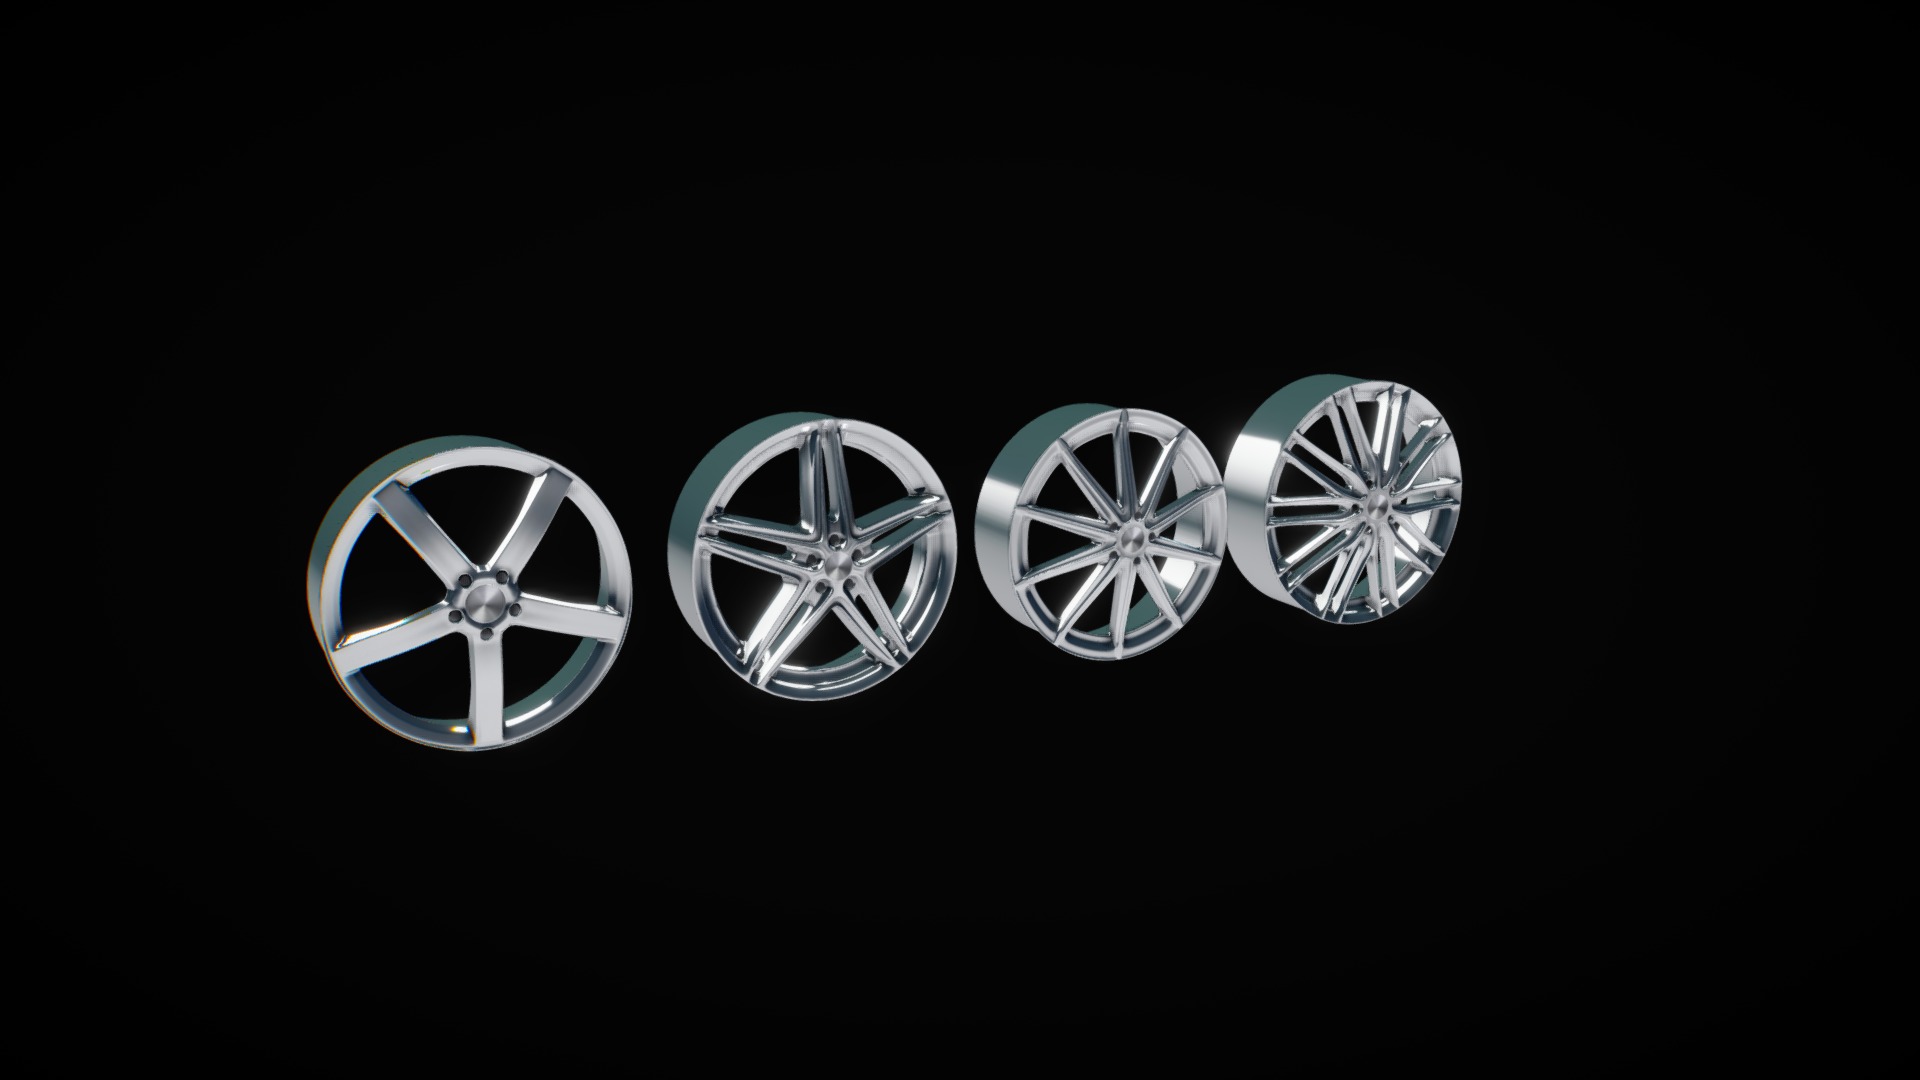 3D model Wheels - This is a 3D model of the Wheels. The 3D model is about a group of silver rims.